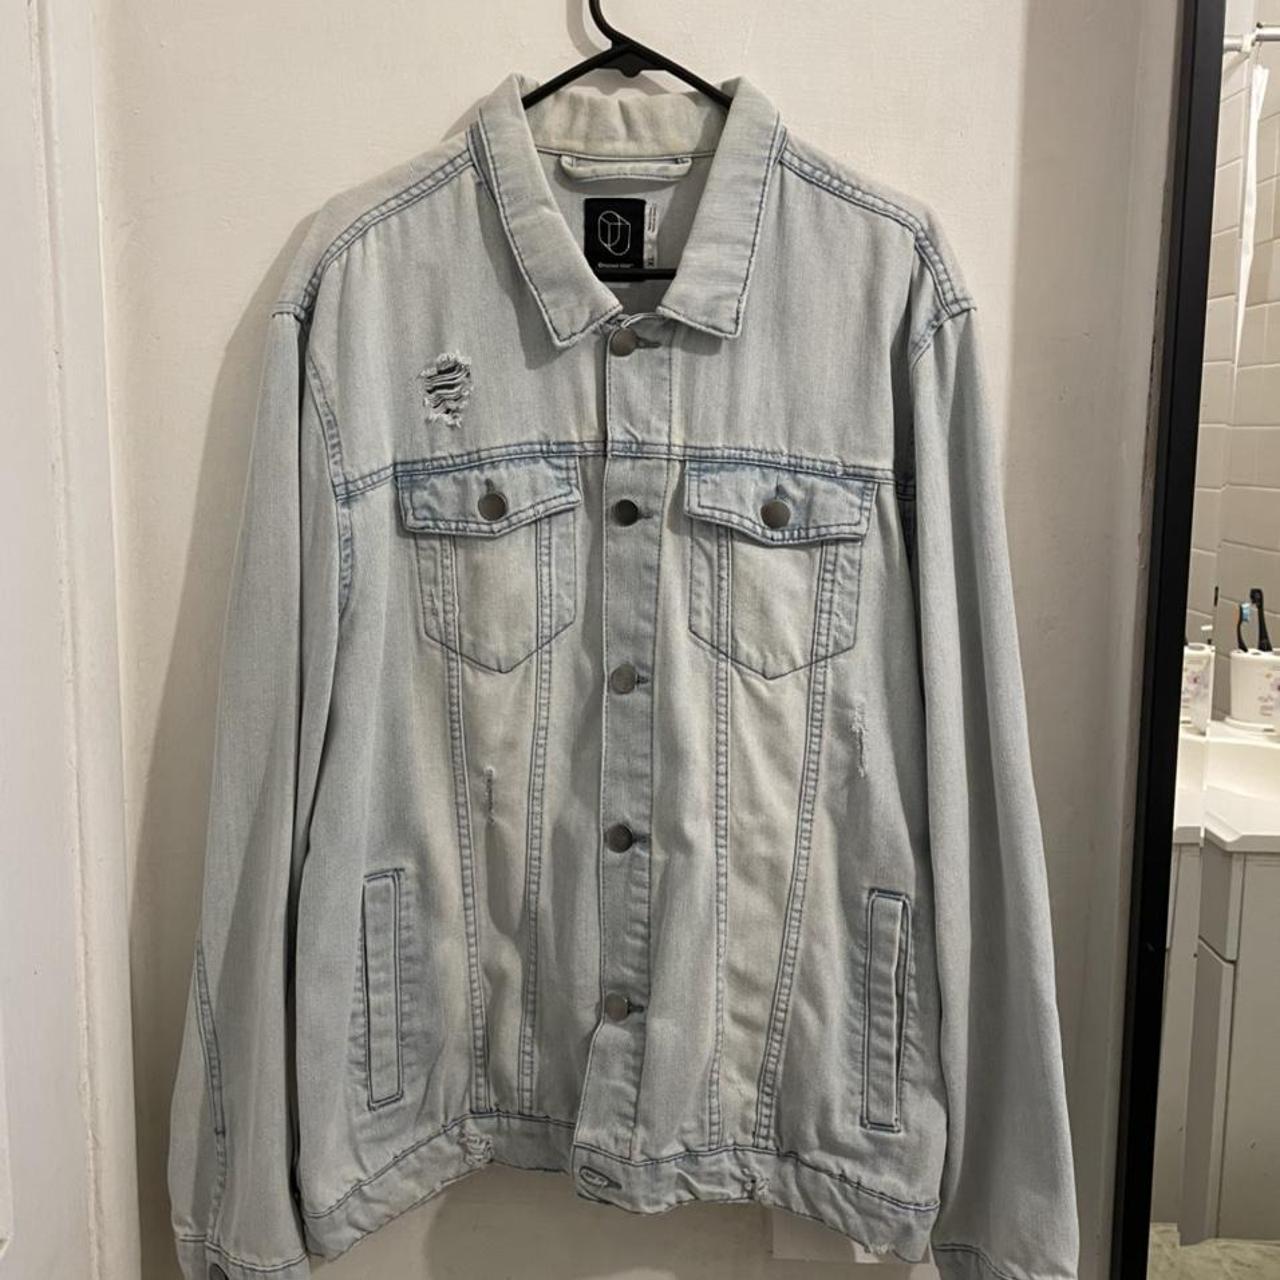 Product Image 1 - Sky blue jacket from original